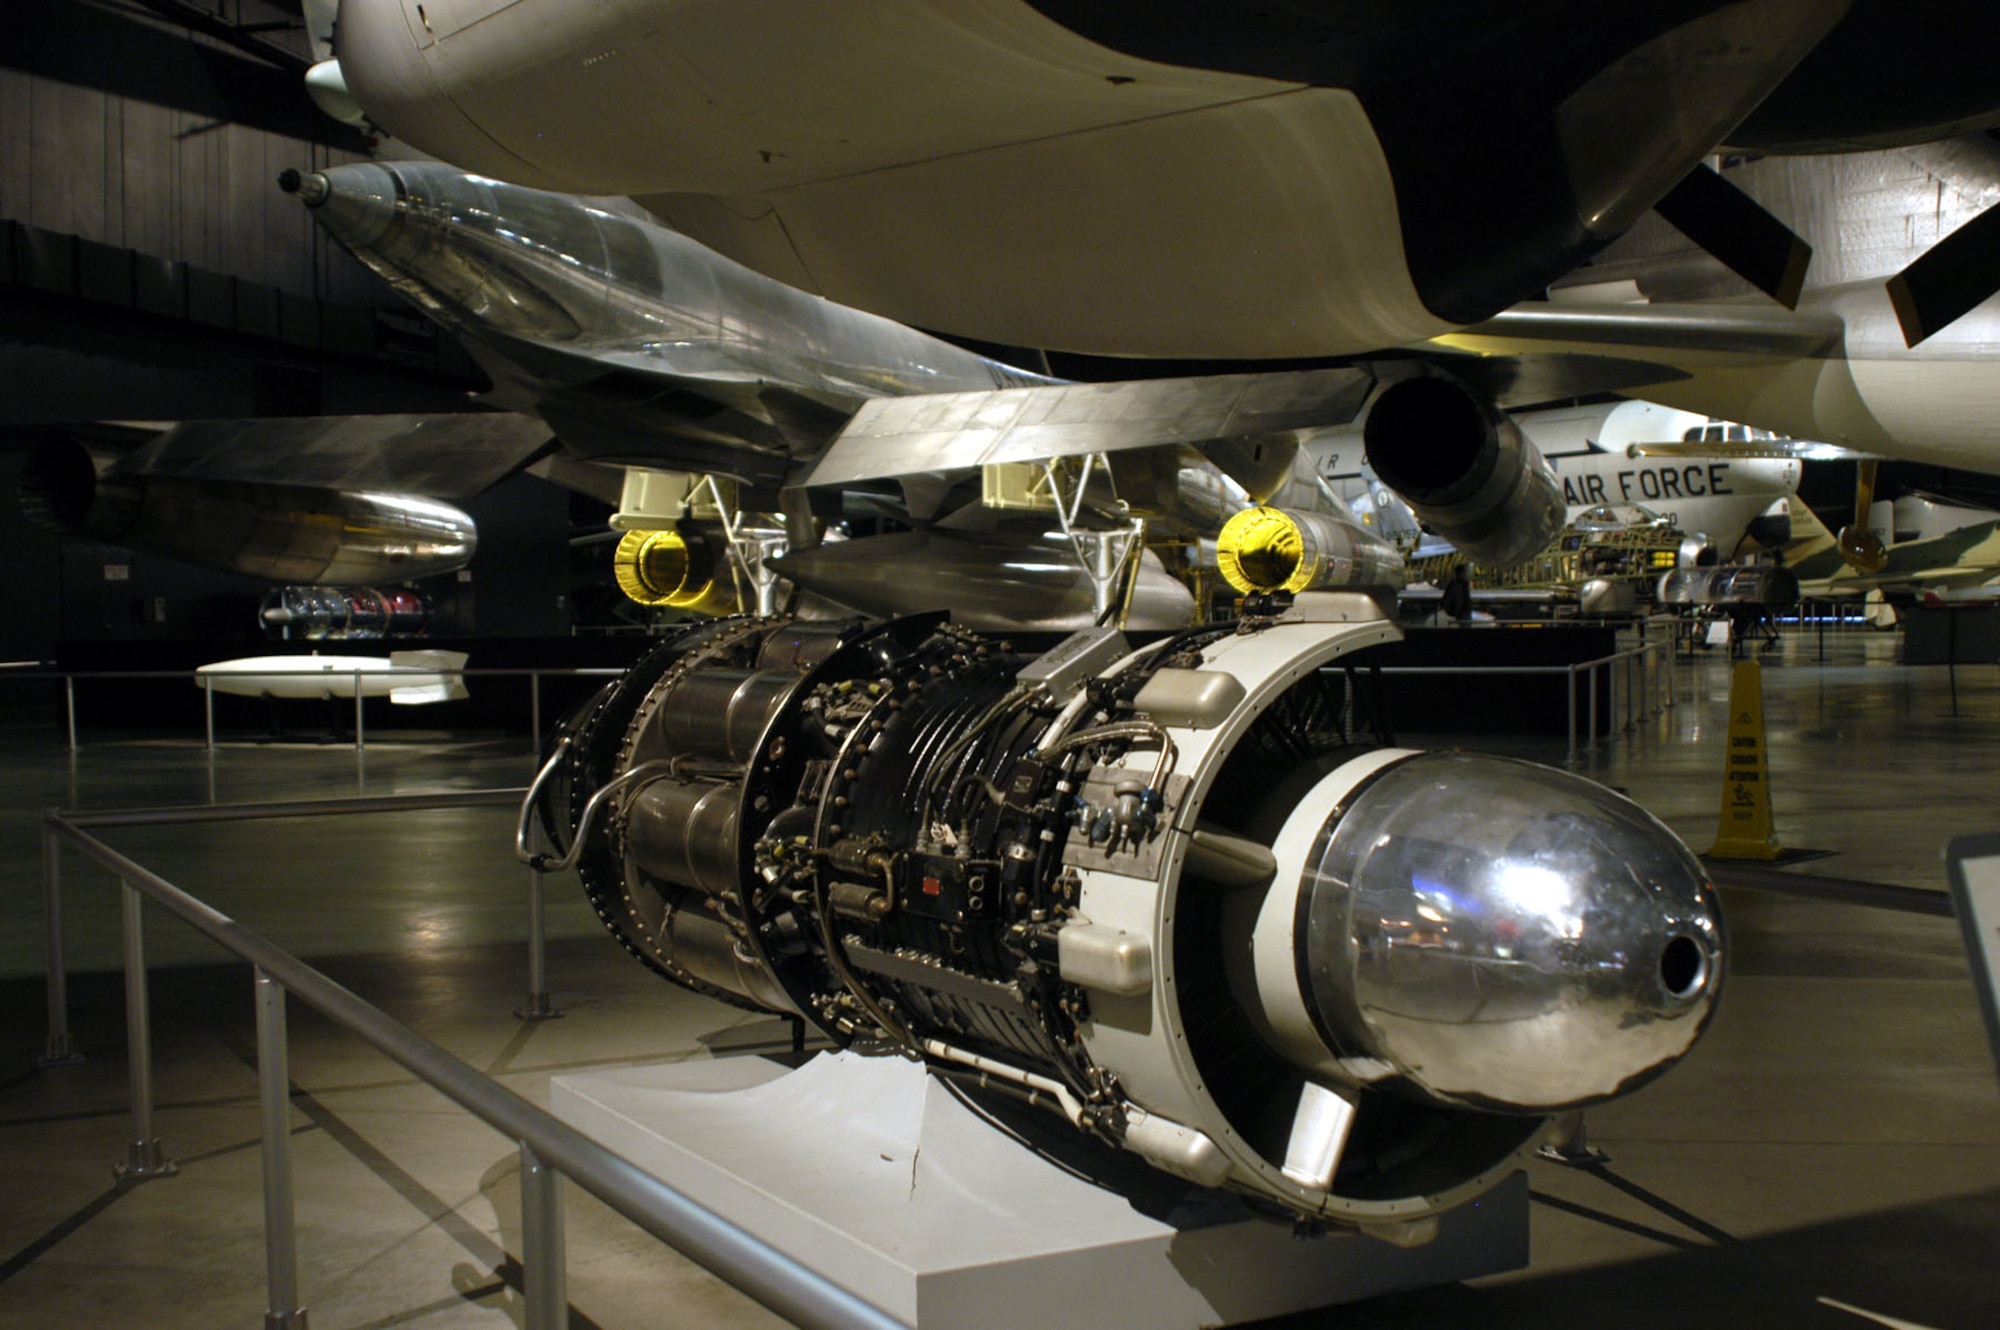 DAYTON, Ohio -- General Electric J47 on display in the Cold War Gallery at the National Museum of the United States Air Force. (U.S. Air Force photo)